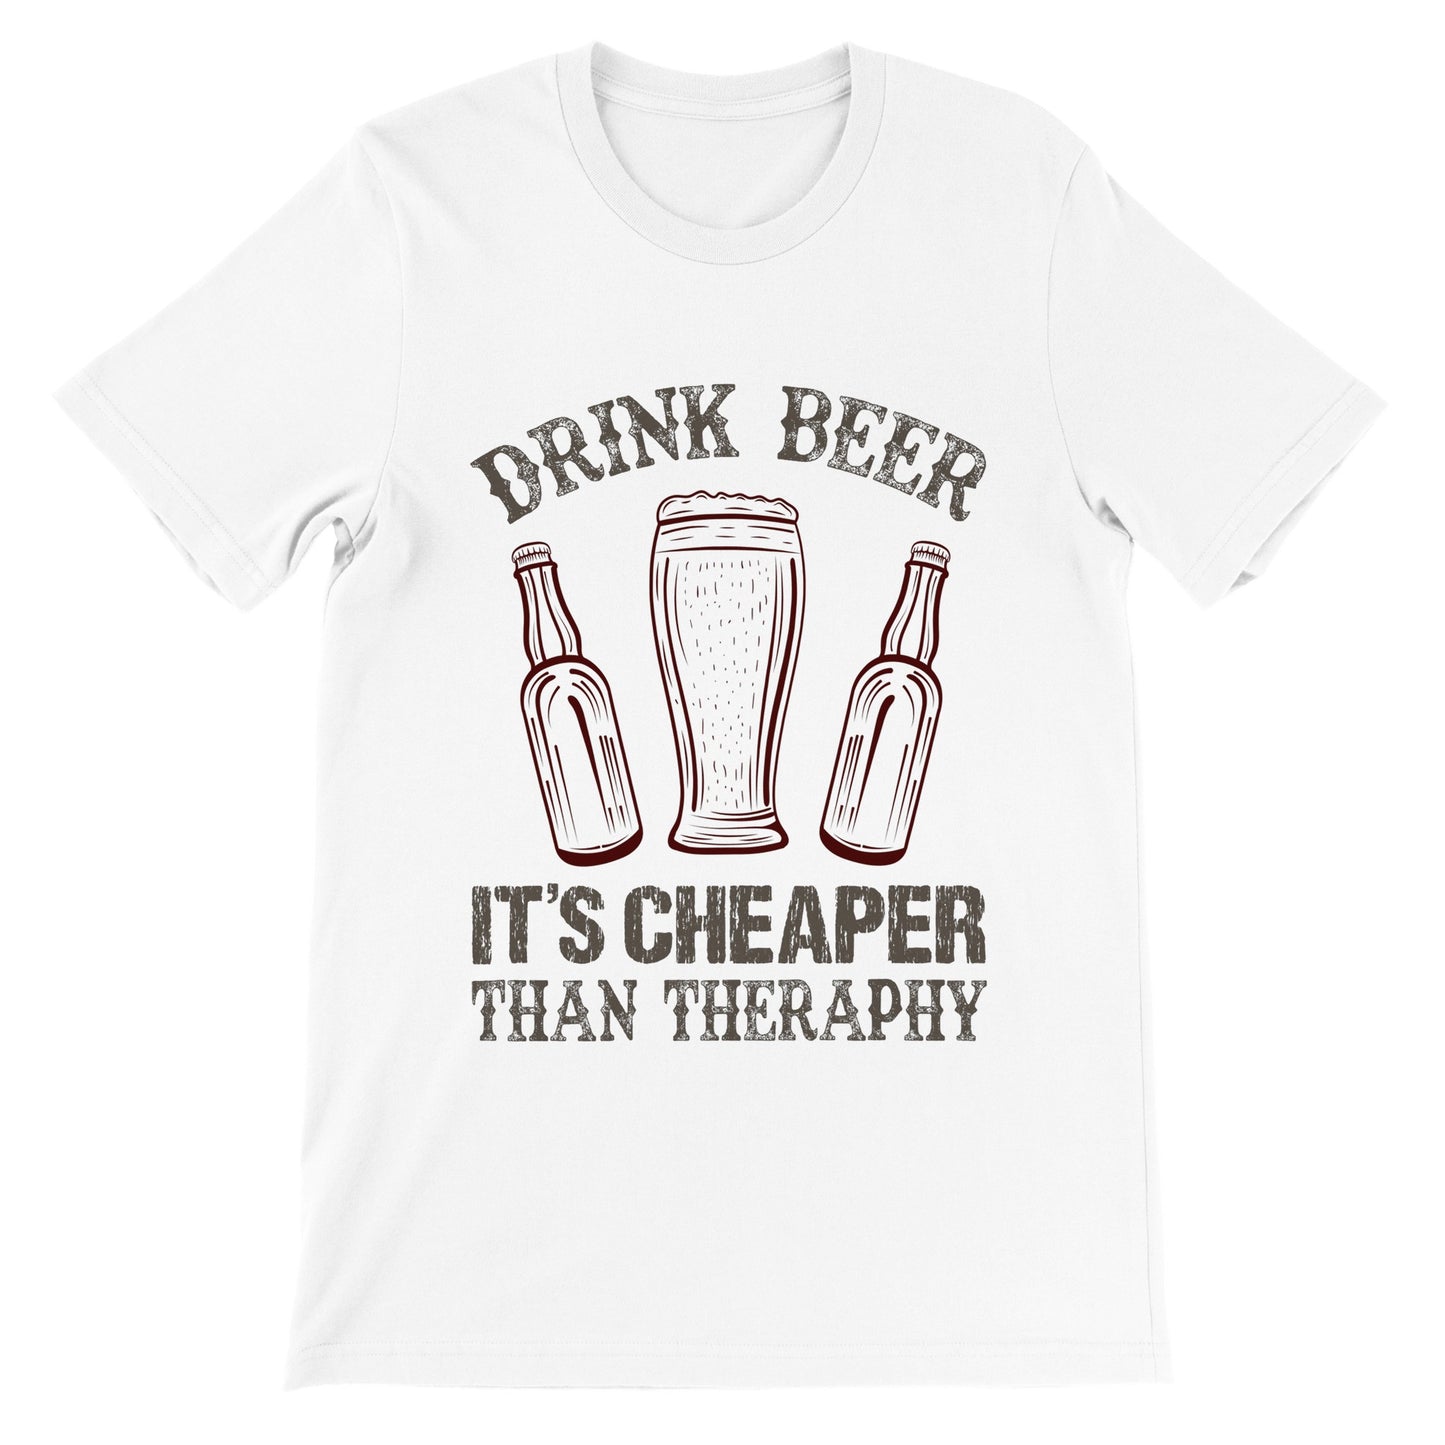 Funny T-Shirts - Drink Beer, It's Cheaper Than Theraphy - Premium Unisex T-Shirt 